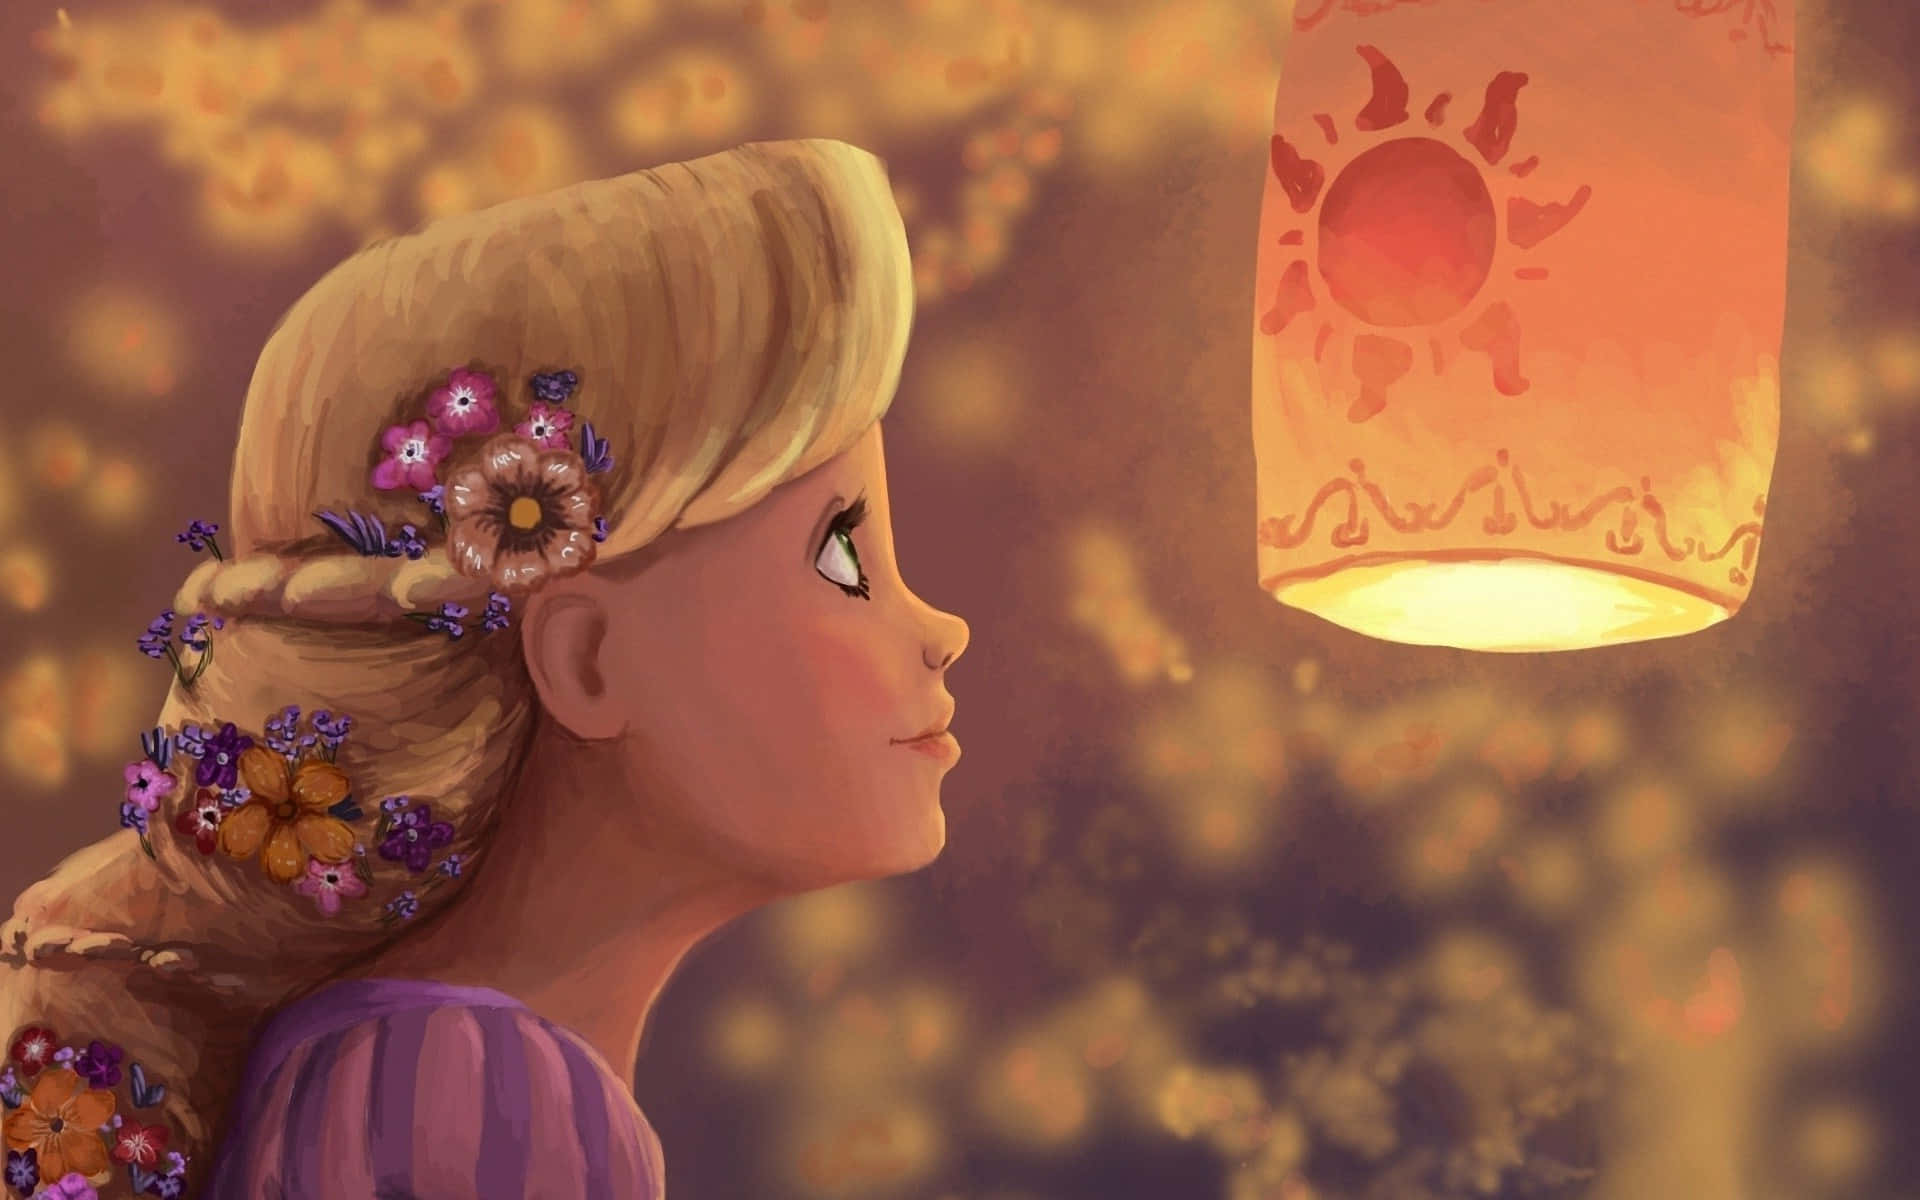 Magical golden-haired Rapunzel gazing from her tower